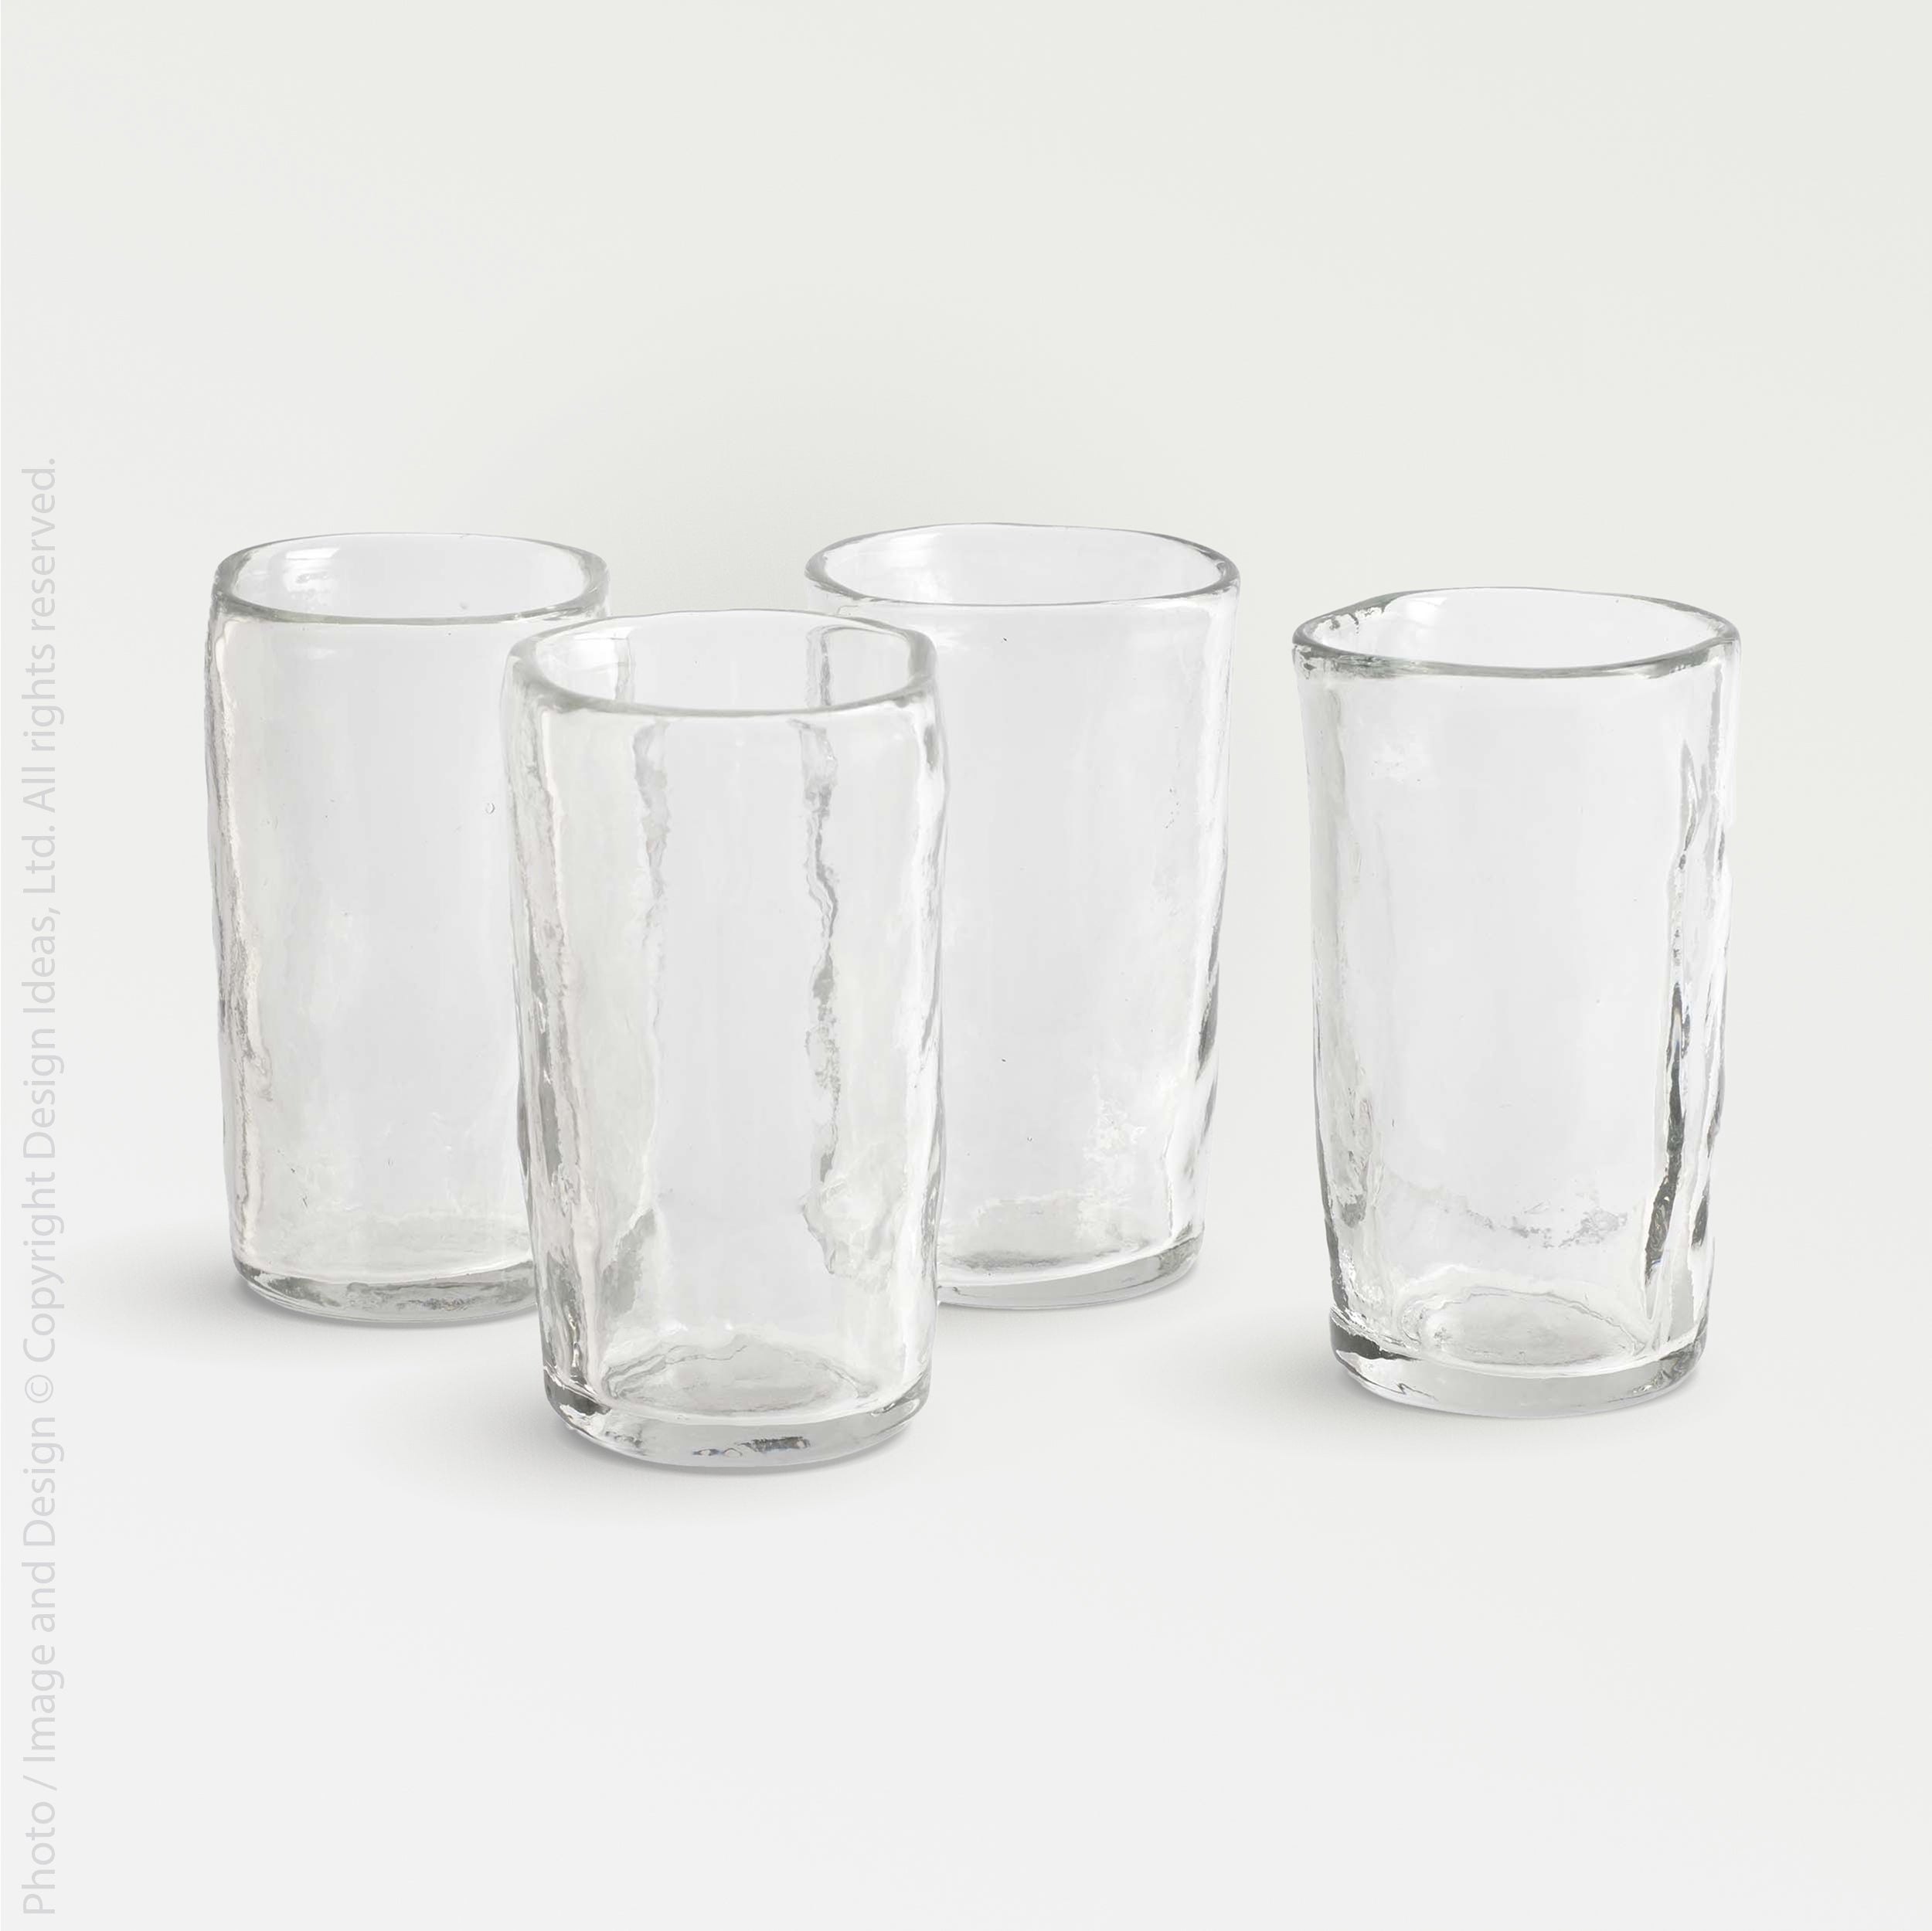 Wabisabi™ chasers - Clear | Image 7 | Premium Glass from the Wabisabi collection | made with Glass for long lasting use | texxture